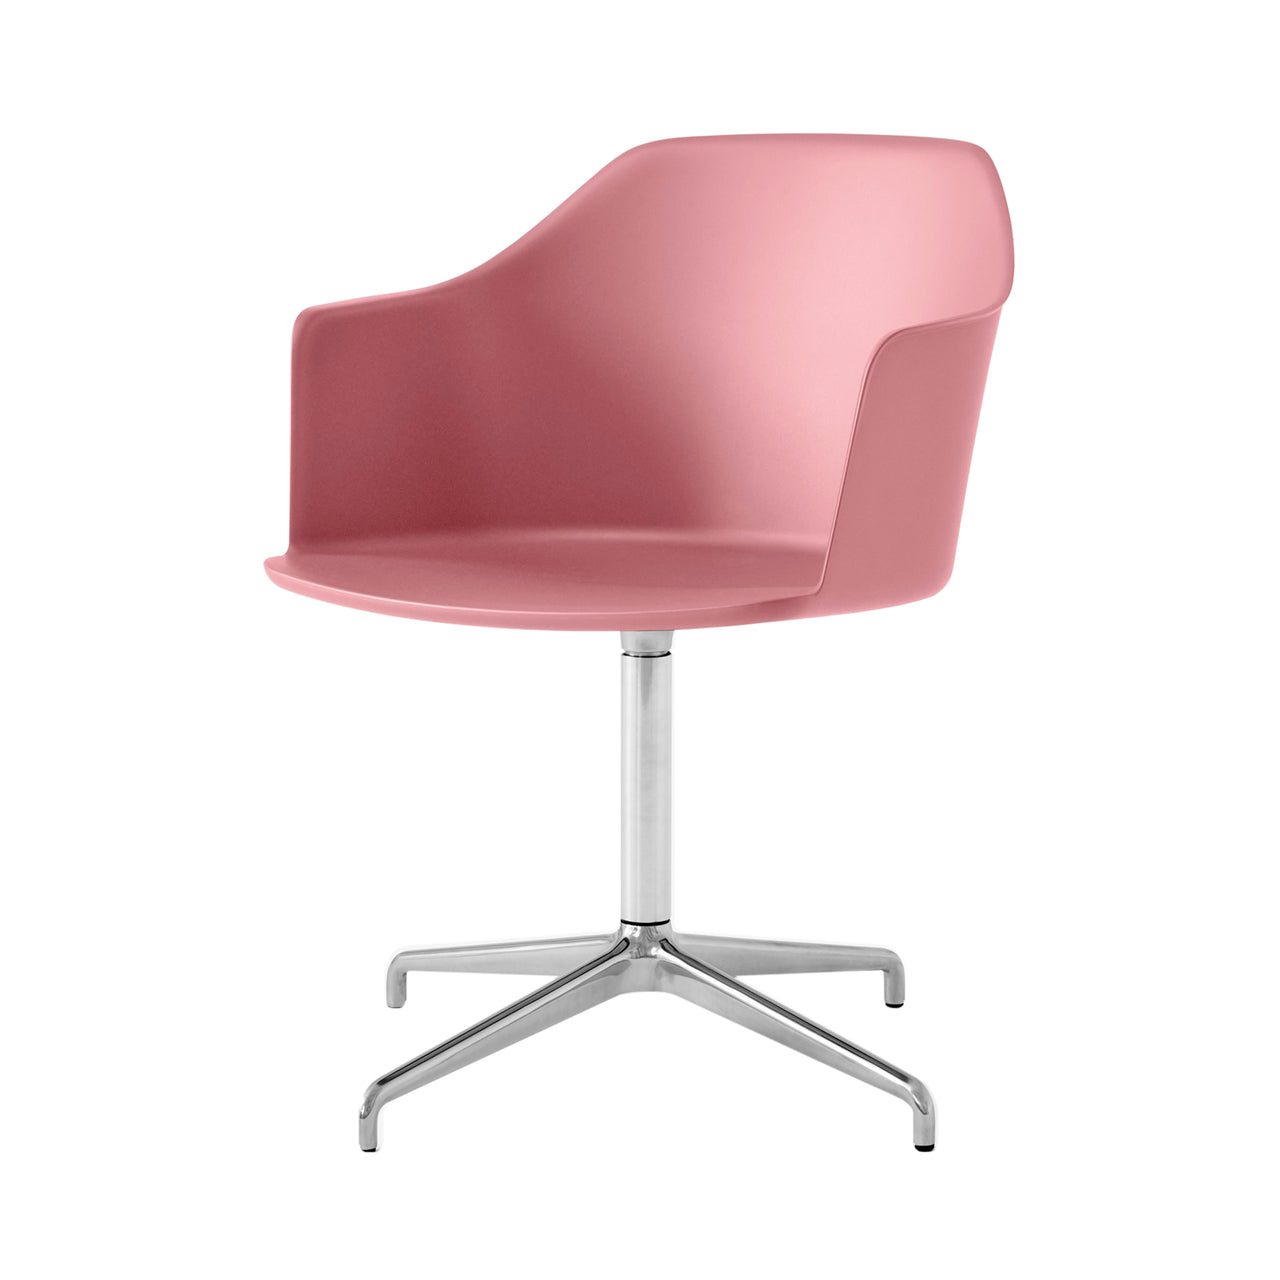 Rely Armchair HW43: Soft Pink + Polished Aluminum